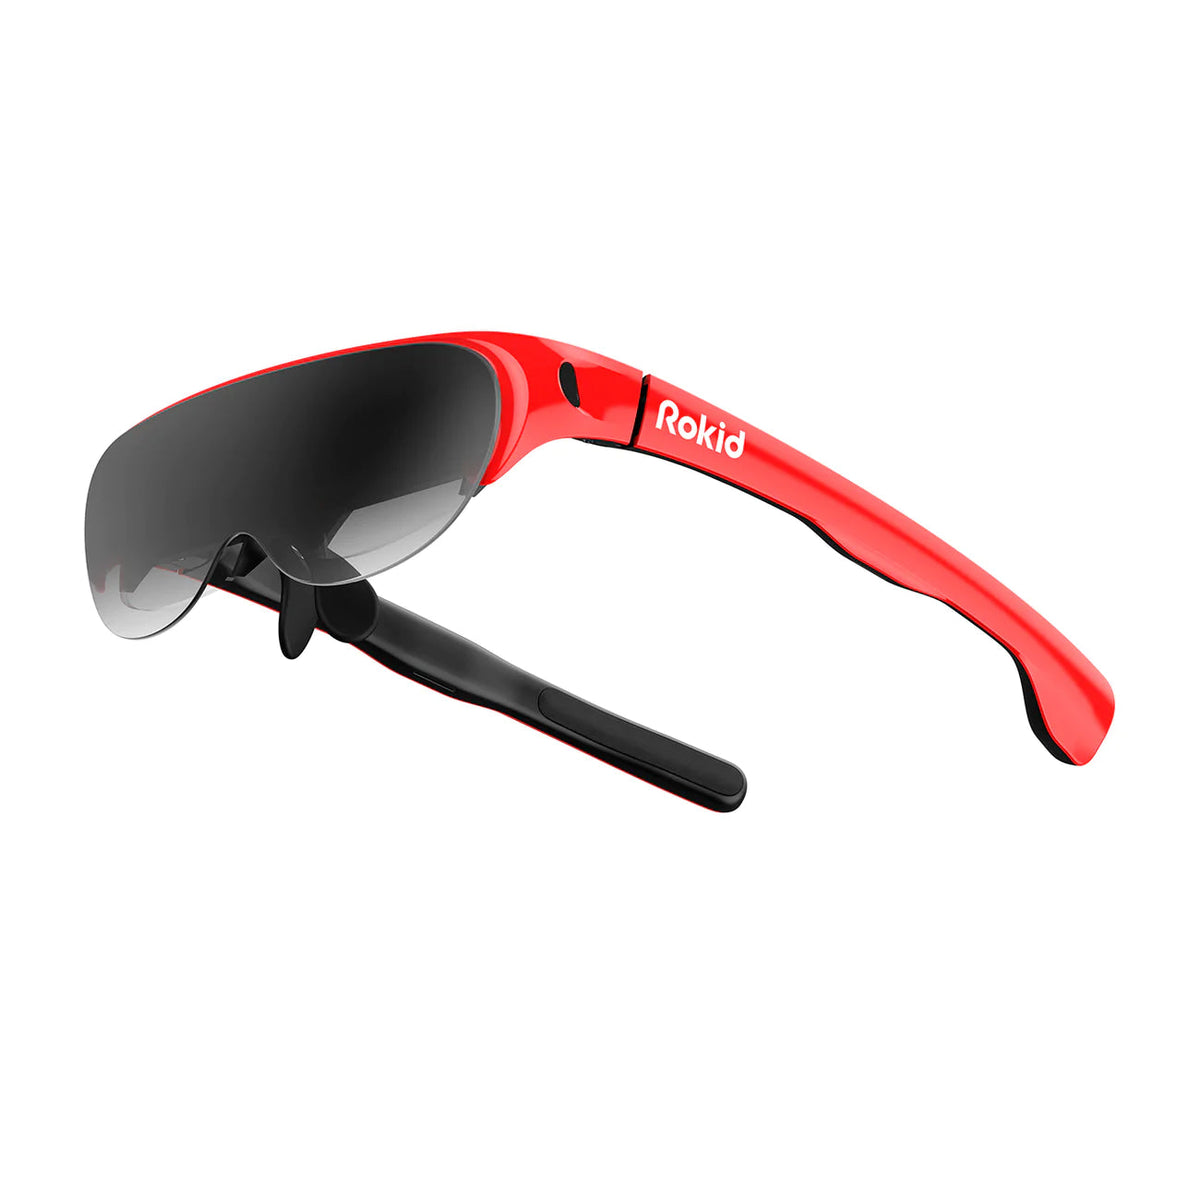 Rokid Air AR Glasses with Voice Control AI, Ruby Red | Rokid - Wake Concept Store  